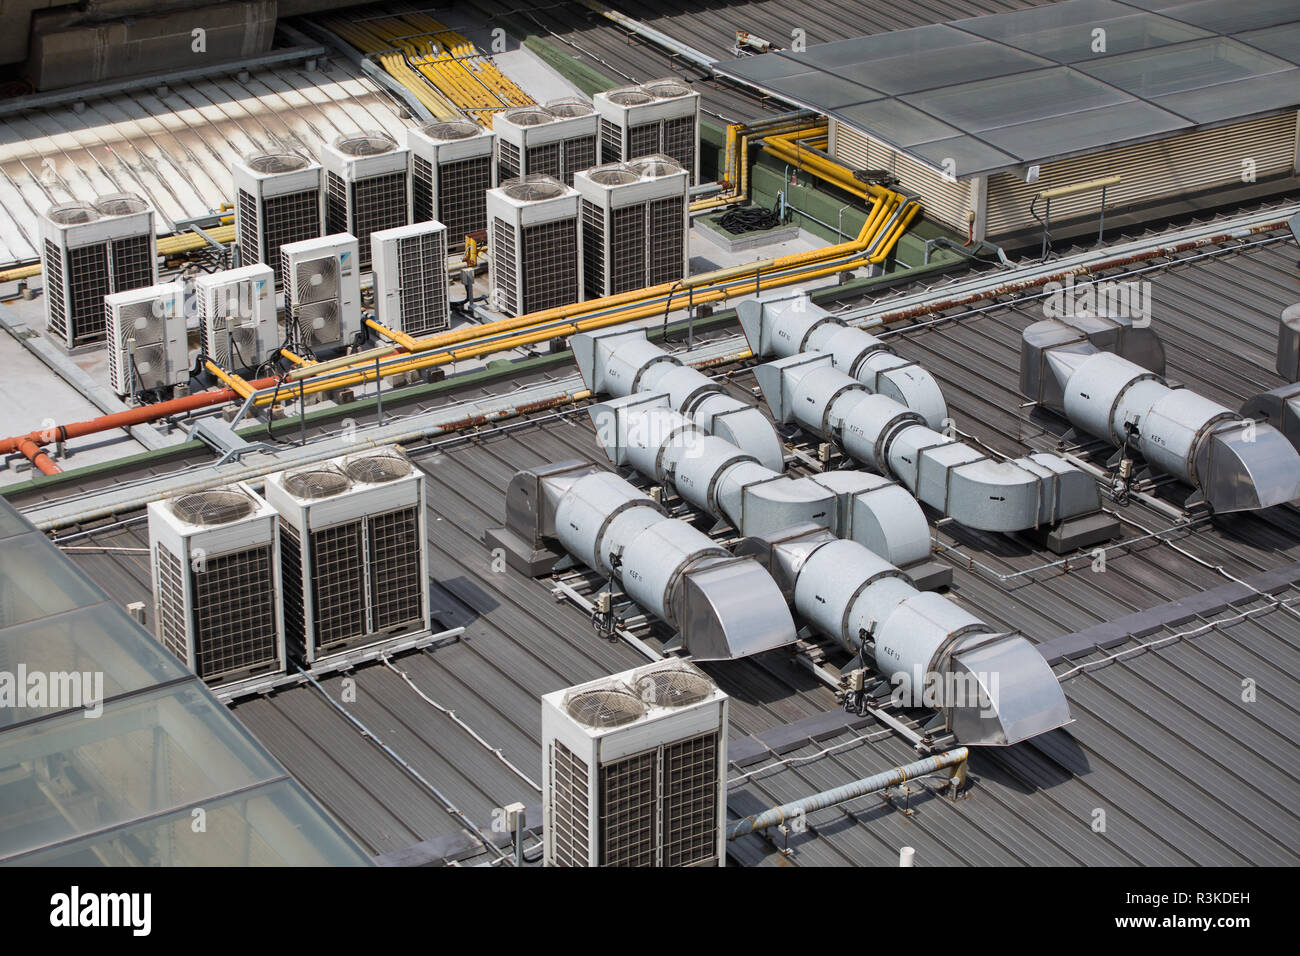 Ventilation and air condition installed neatly on a commercial building rooftop. Singapore Stock Photo